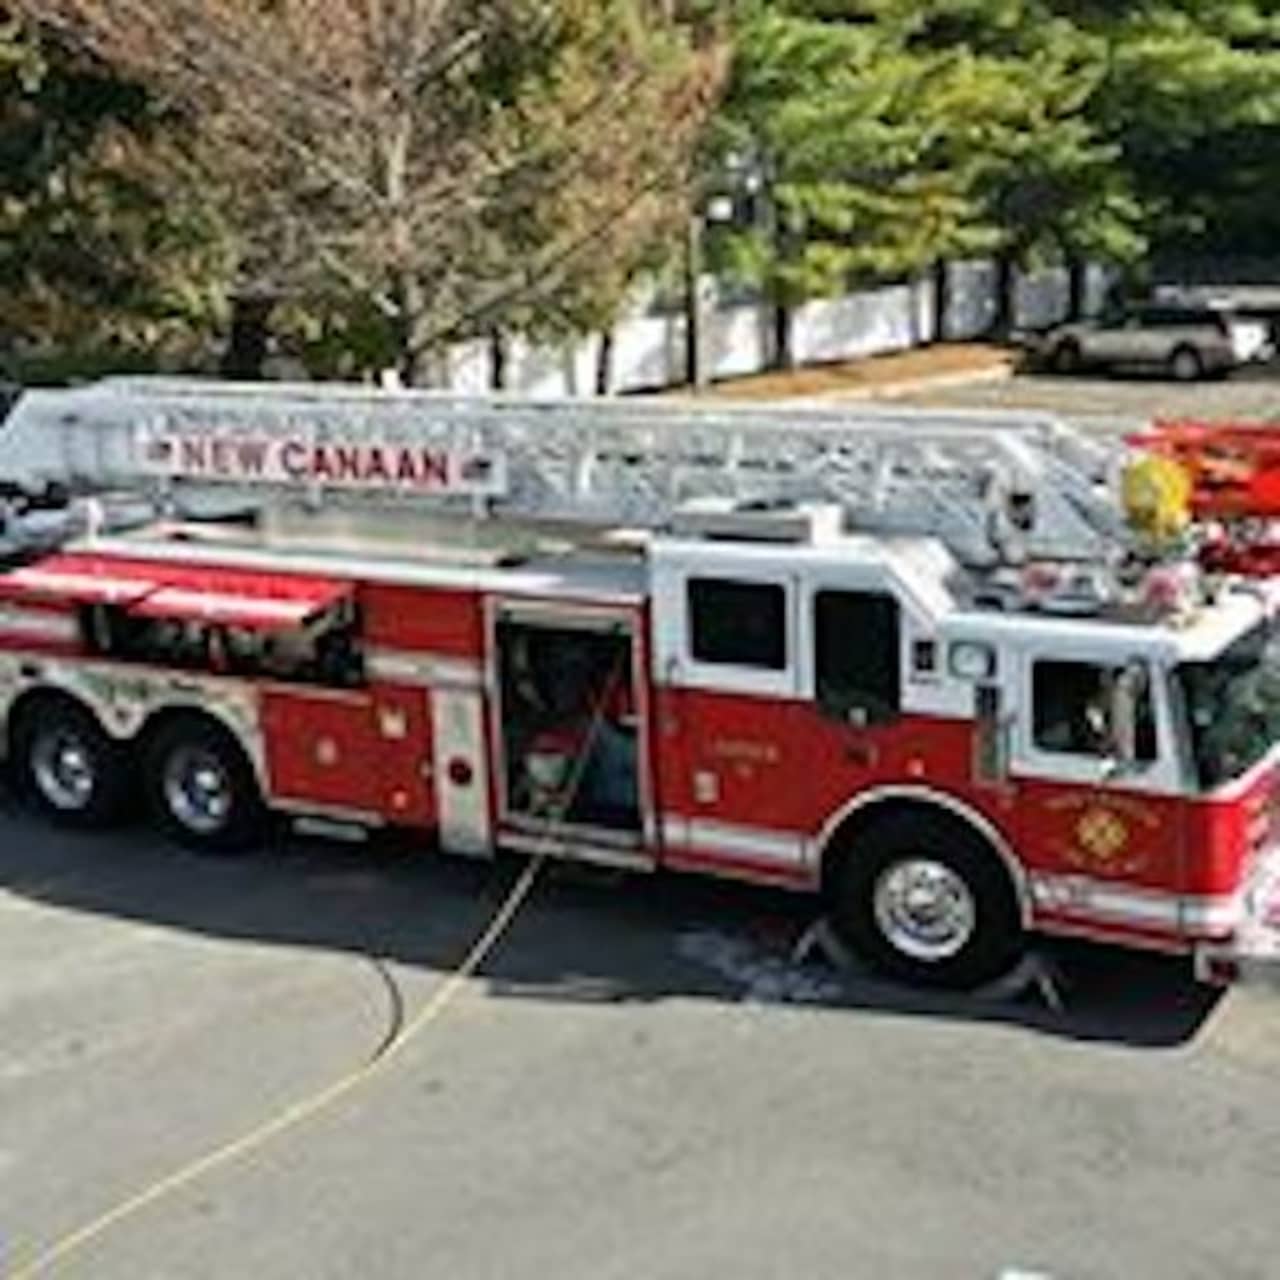 New Canaan Fire Department